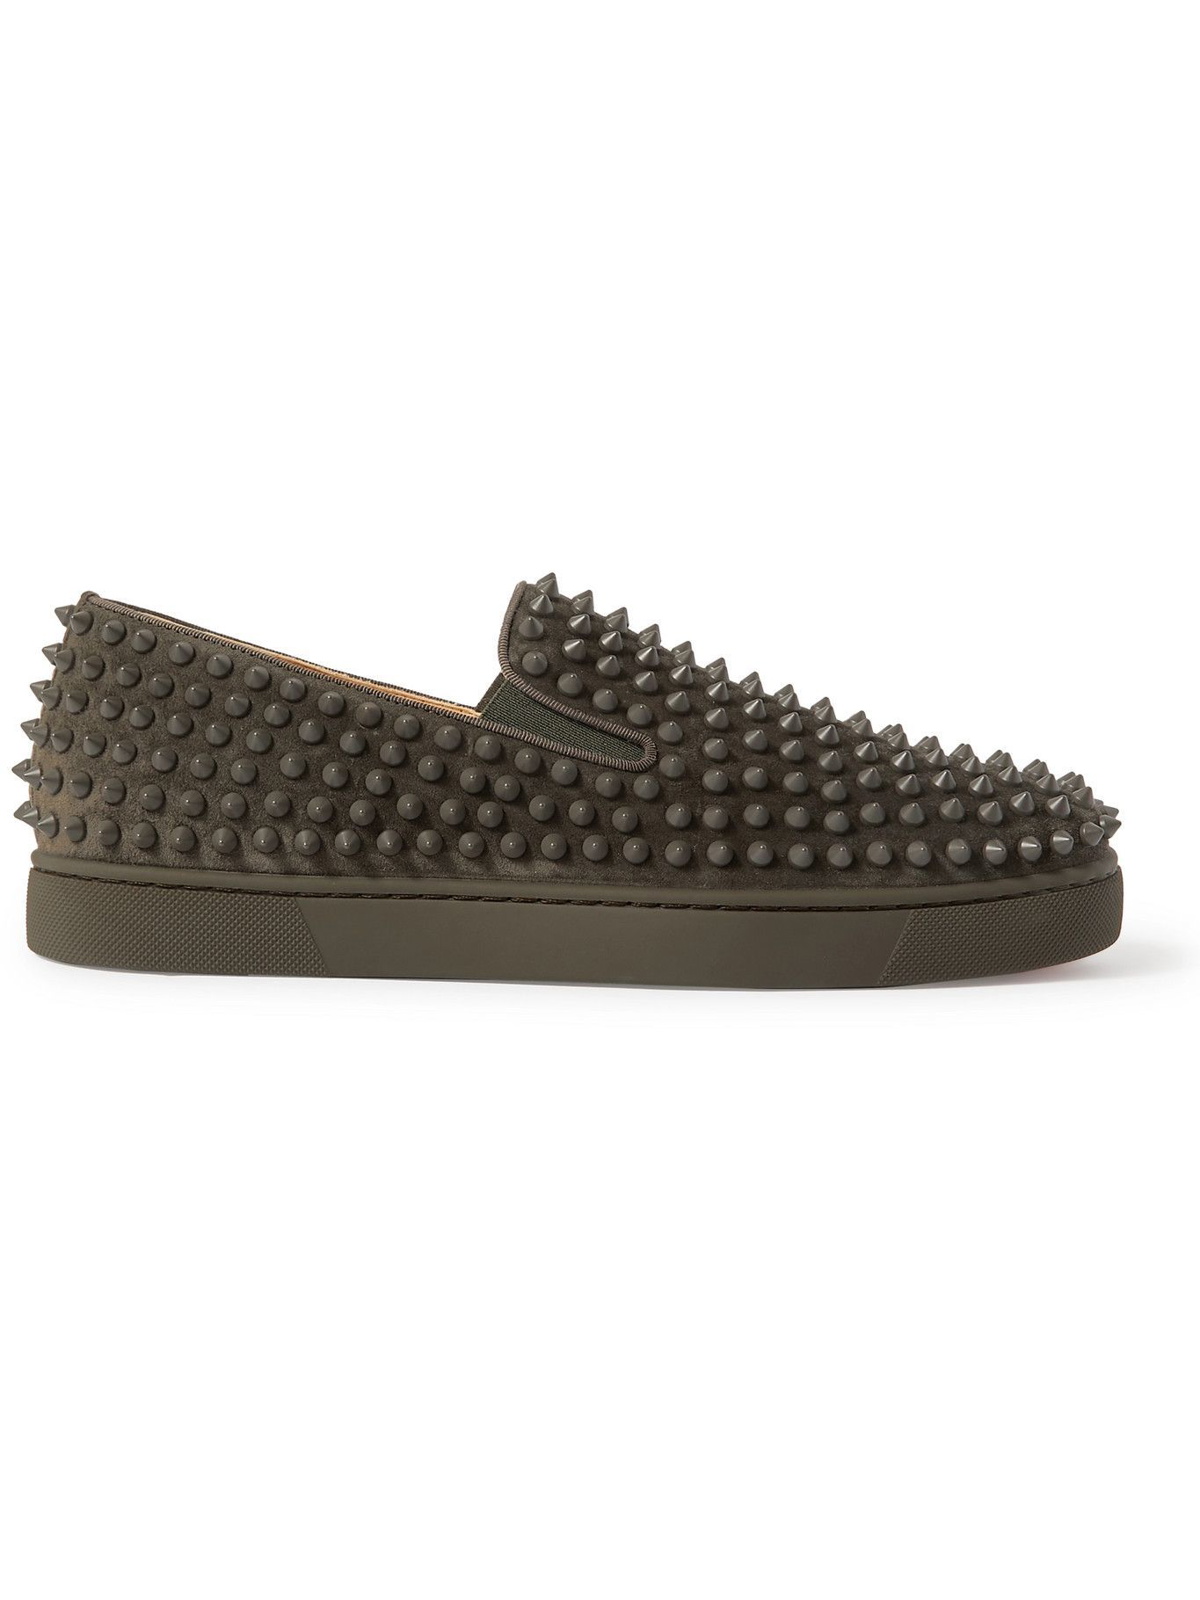 CHRISTIAN LOUBOUTIN - Suede Slip-On Sneakers - Gray